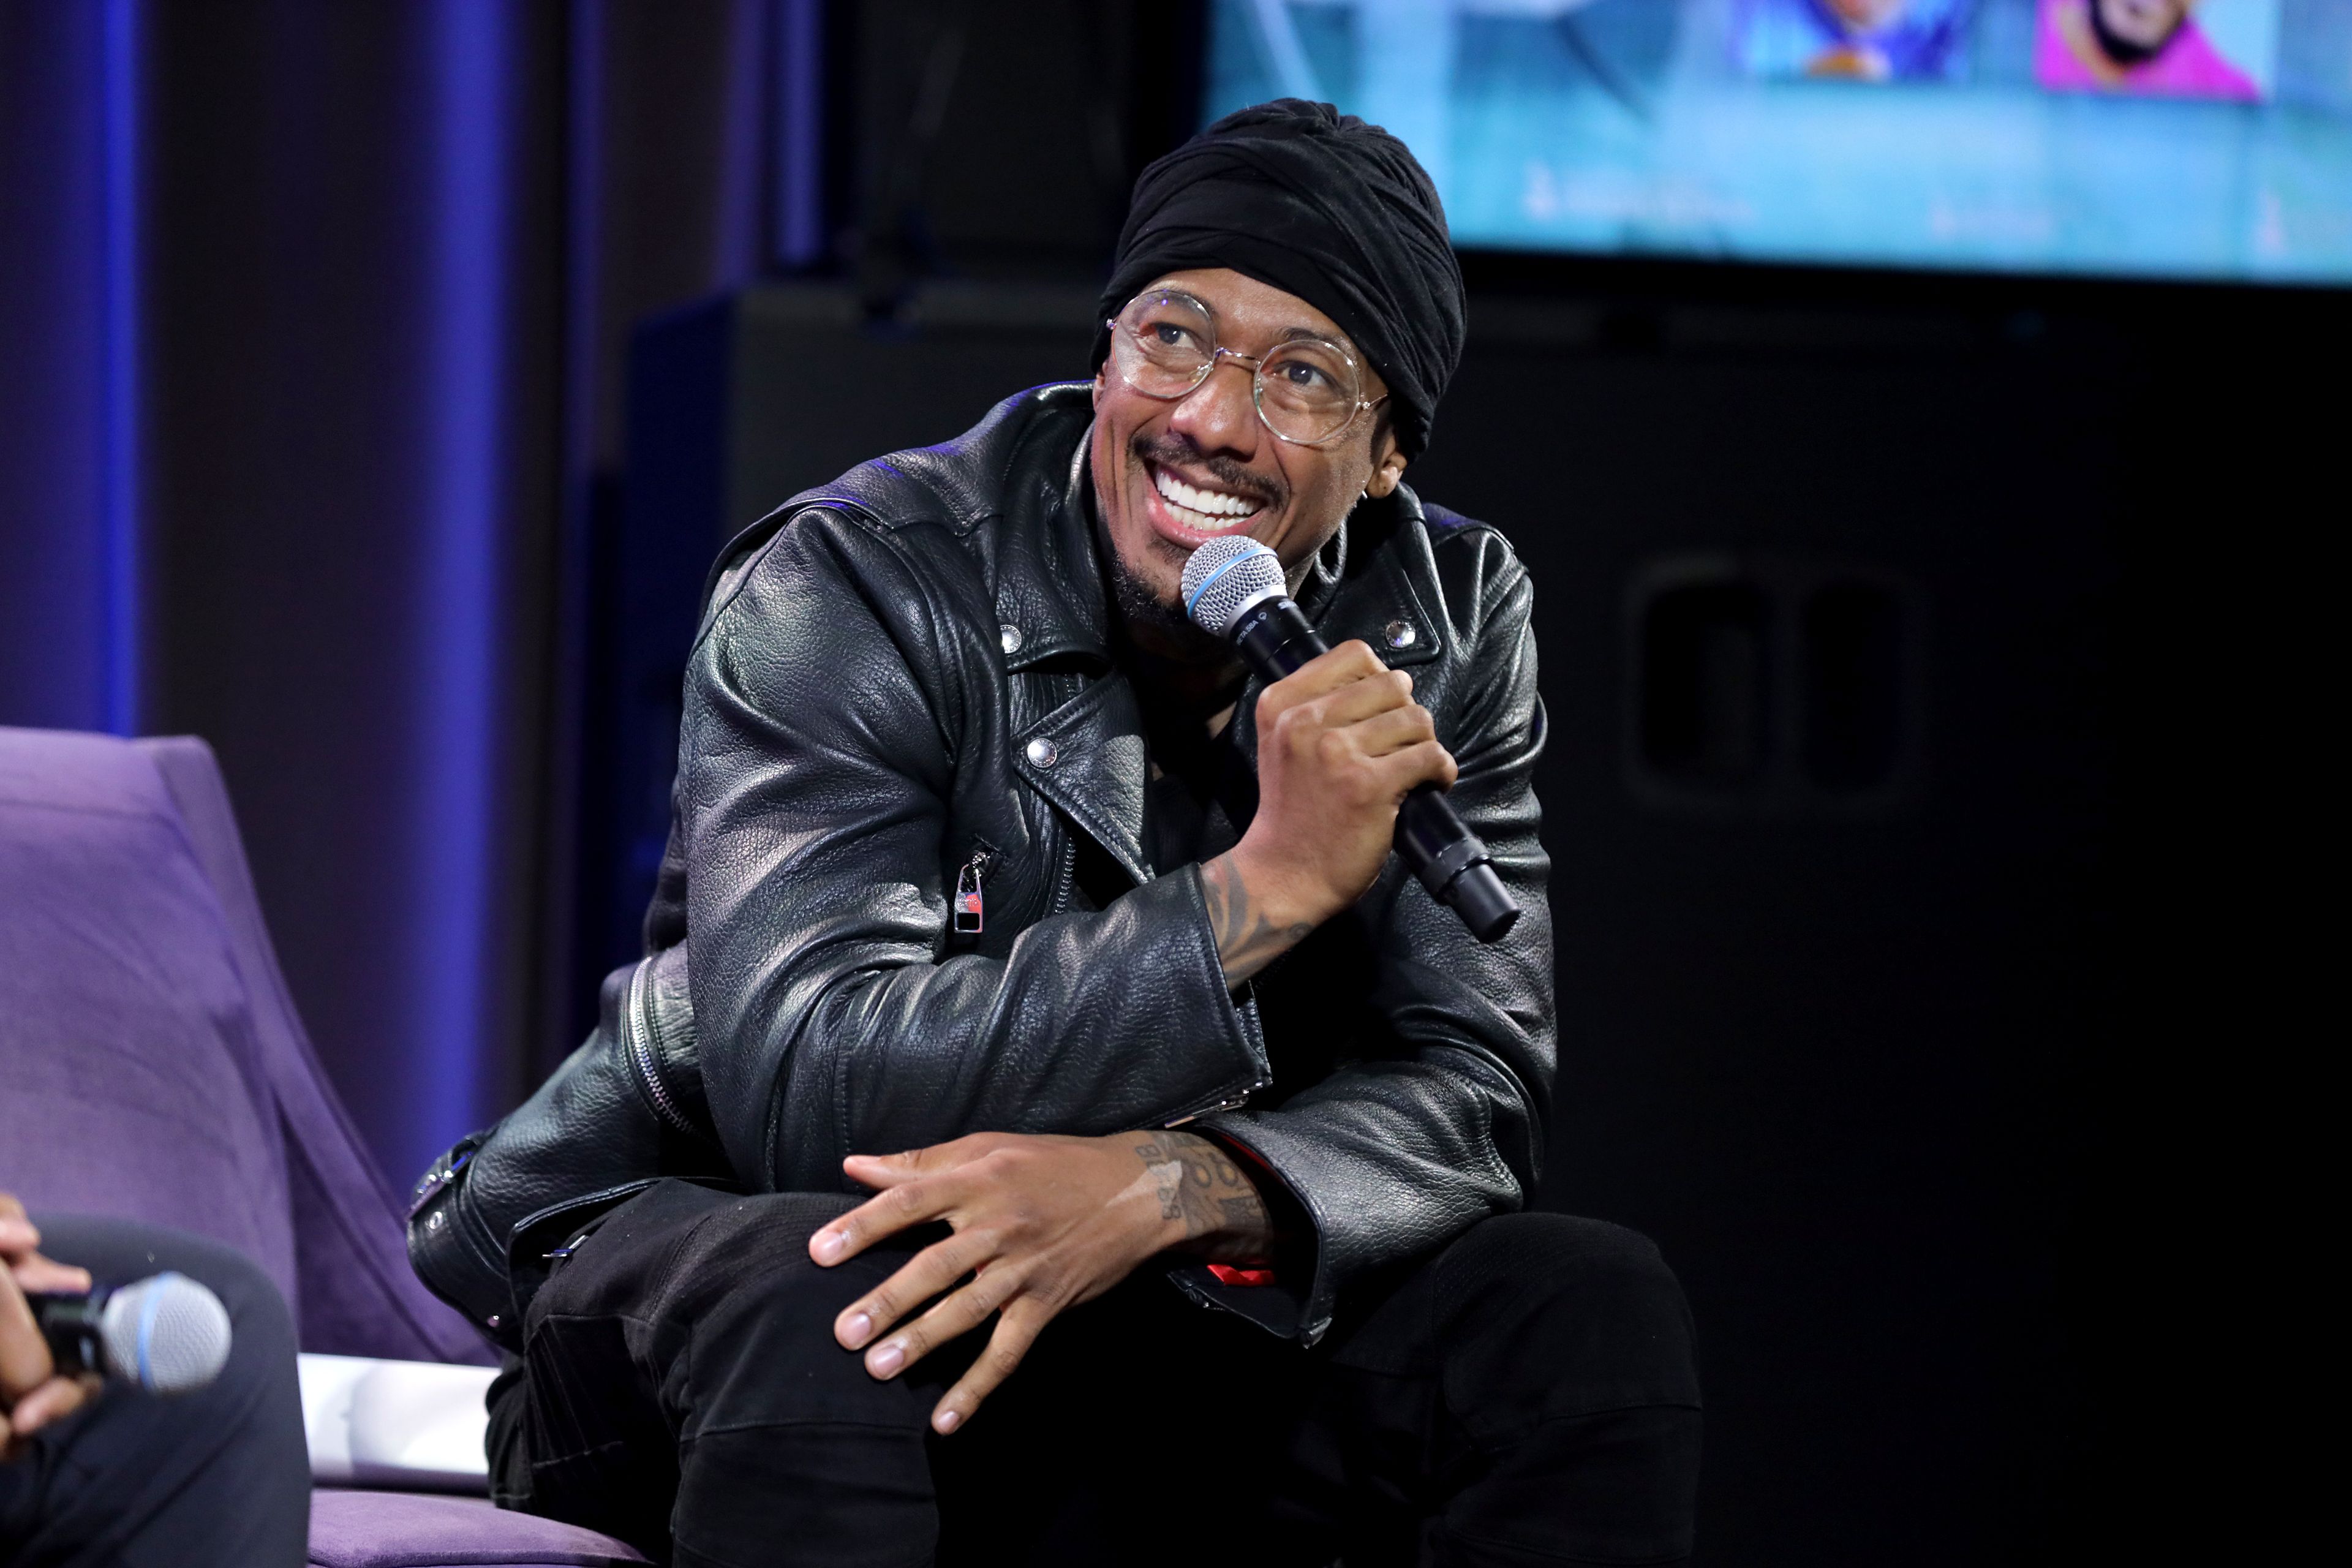 Social Media Reacts To Nick Cannon Saying He'd Have Baby Number 13 W/ Taylor Swift